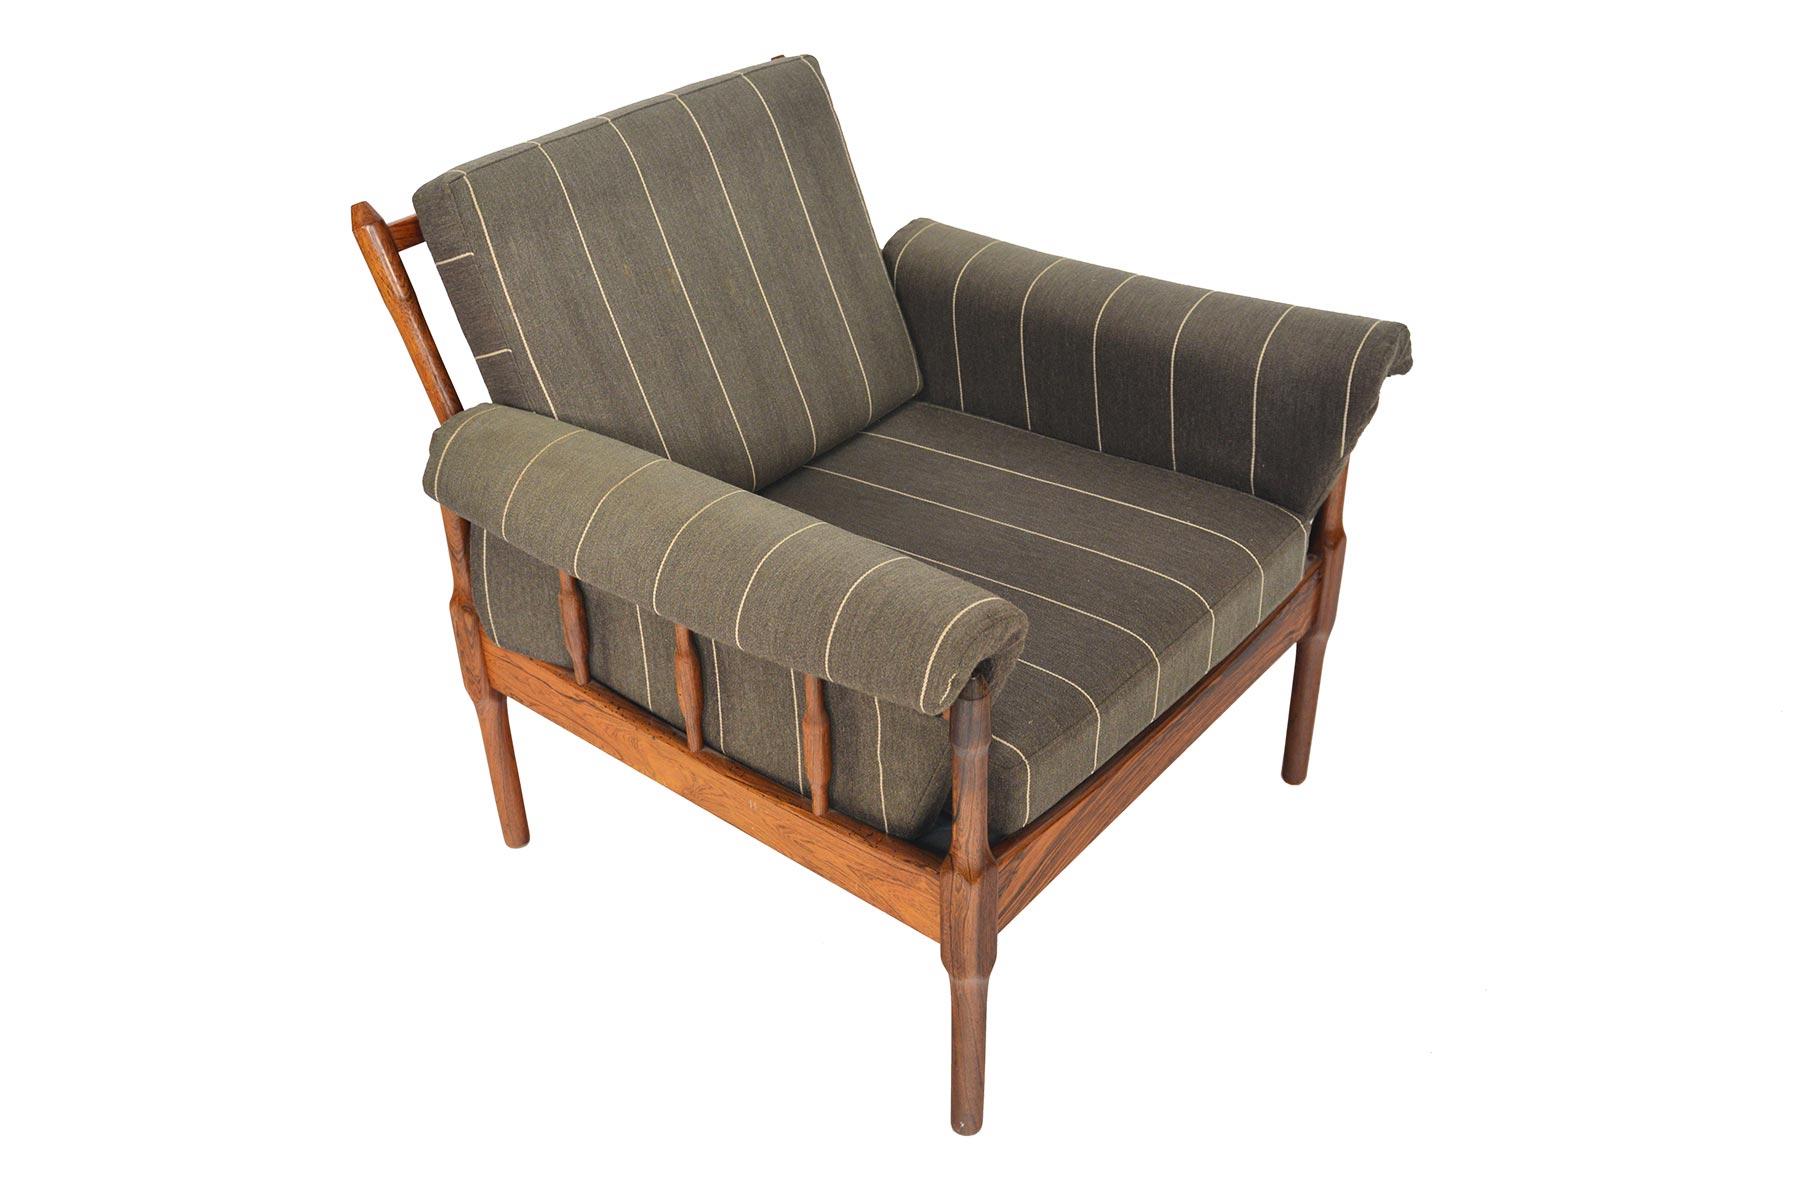 Origin: Denmark
Designer: Torbjørn Afdal
Manufacturer: Bruksbo
Era: 1960s
Dimensions: 30 wide x 31 deep x 31 tall 
Seat: 21 wide x 23 deep x 16 tall
Condition: Frame in excellent original condition. Fabric in good original condition with some